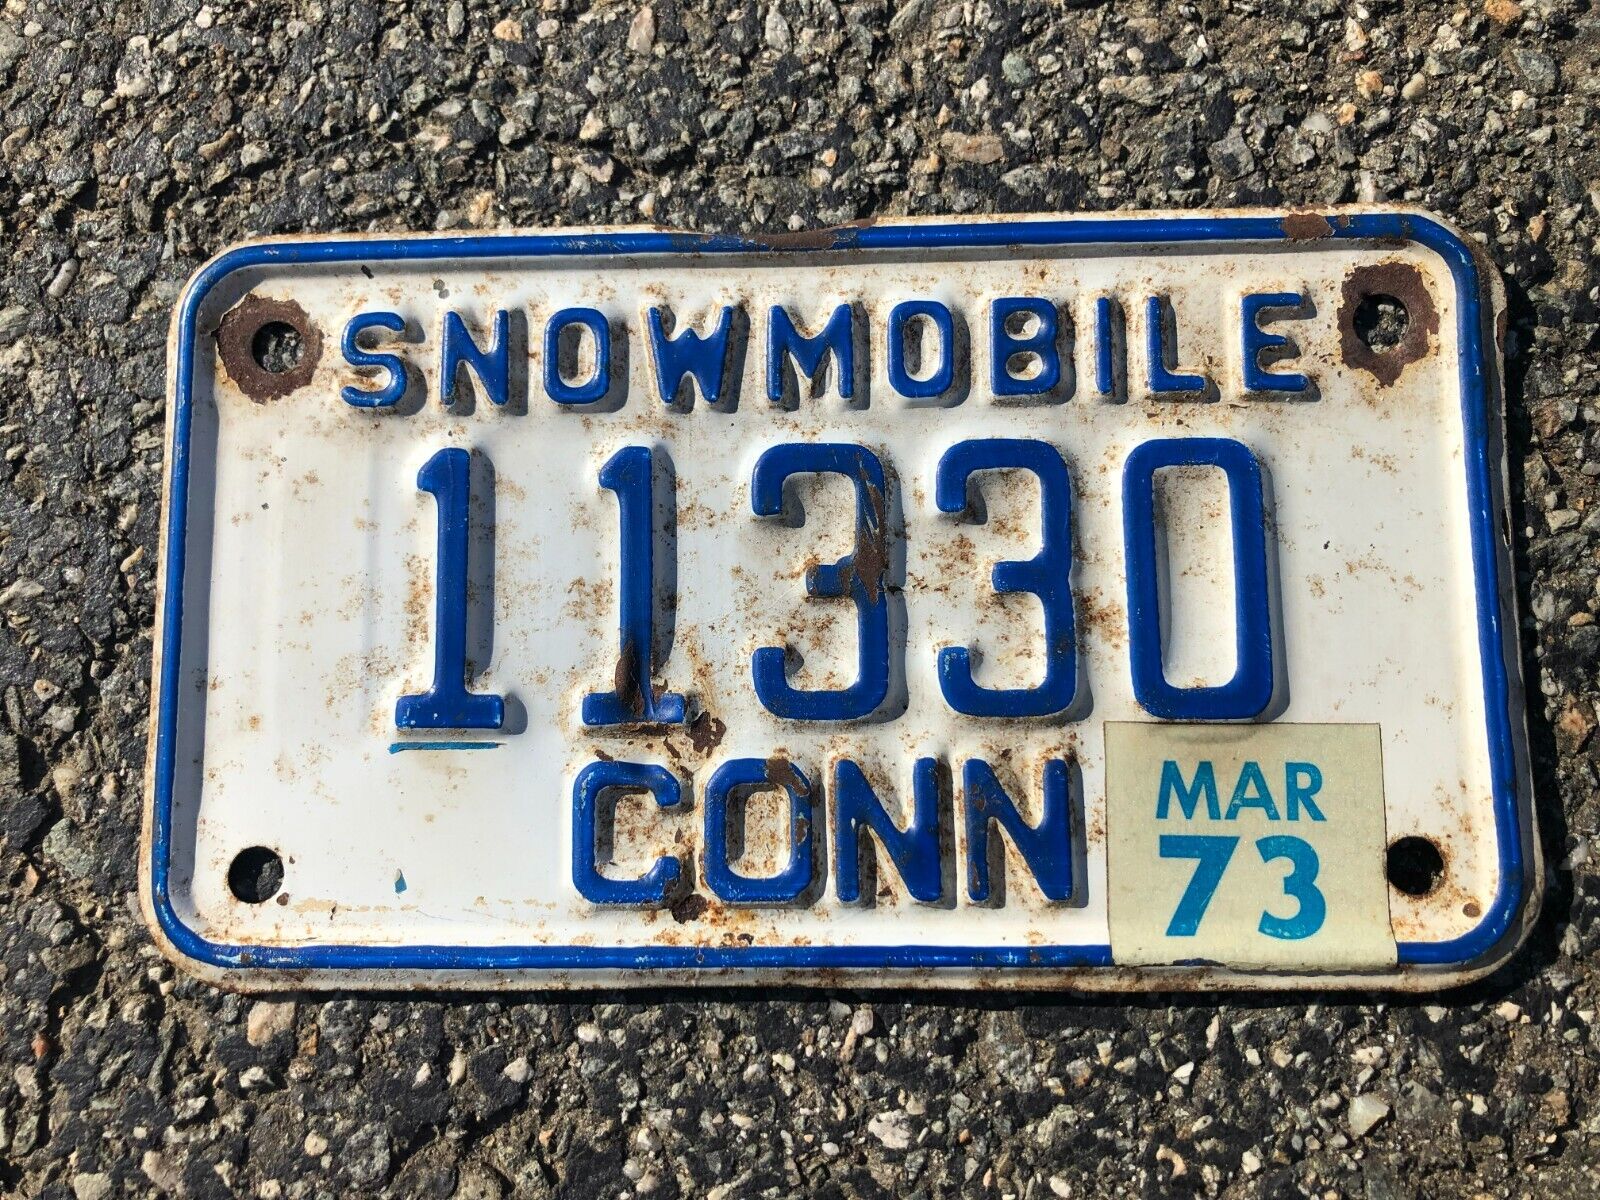 11330 Snowmobile CONNECTICUT CT 1973 LICENSE PLATE 50 Years Old Collect Display